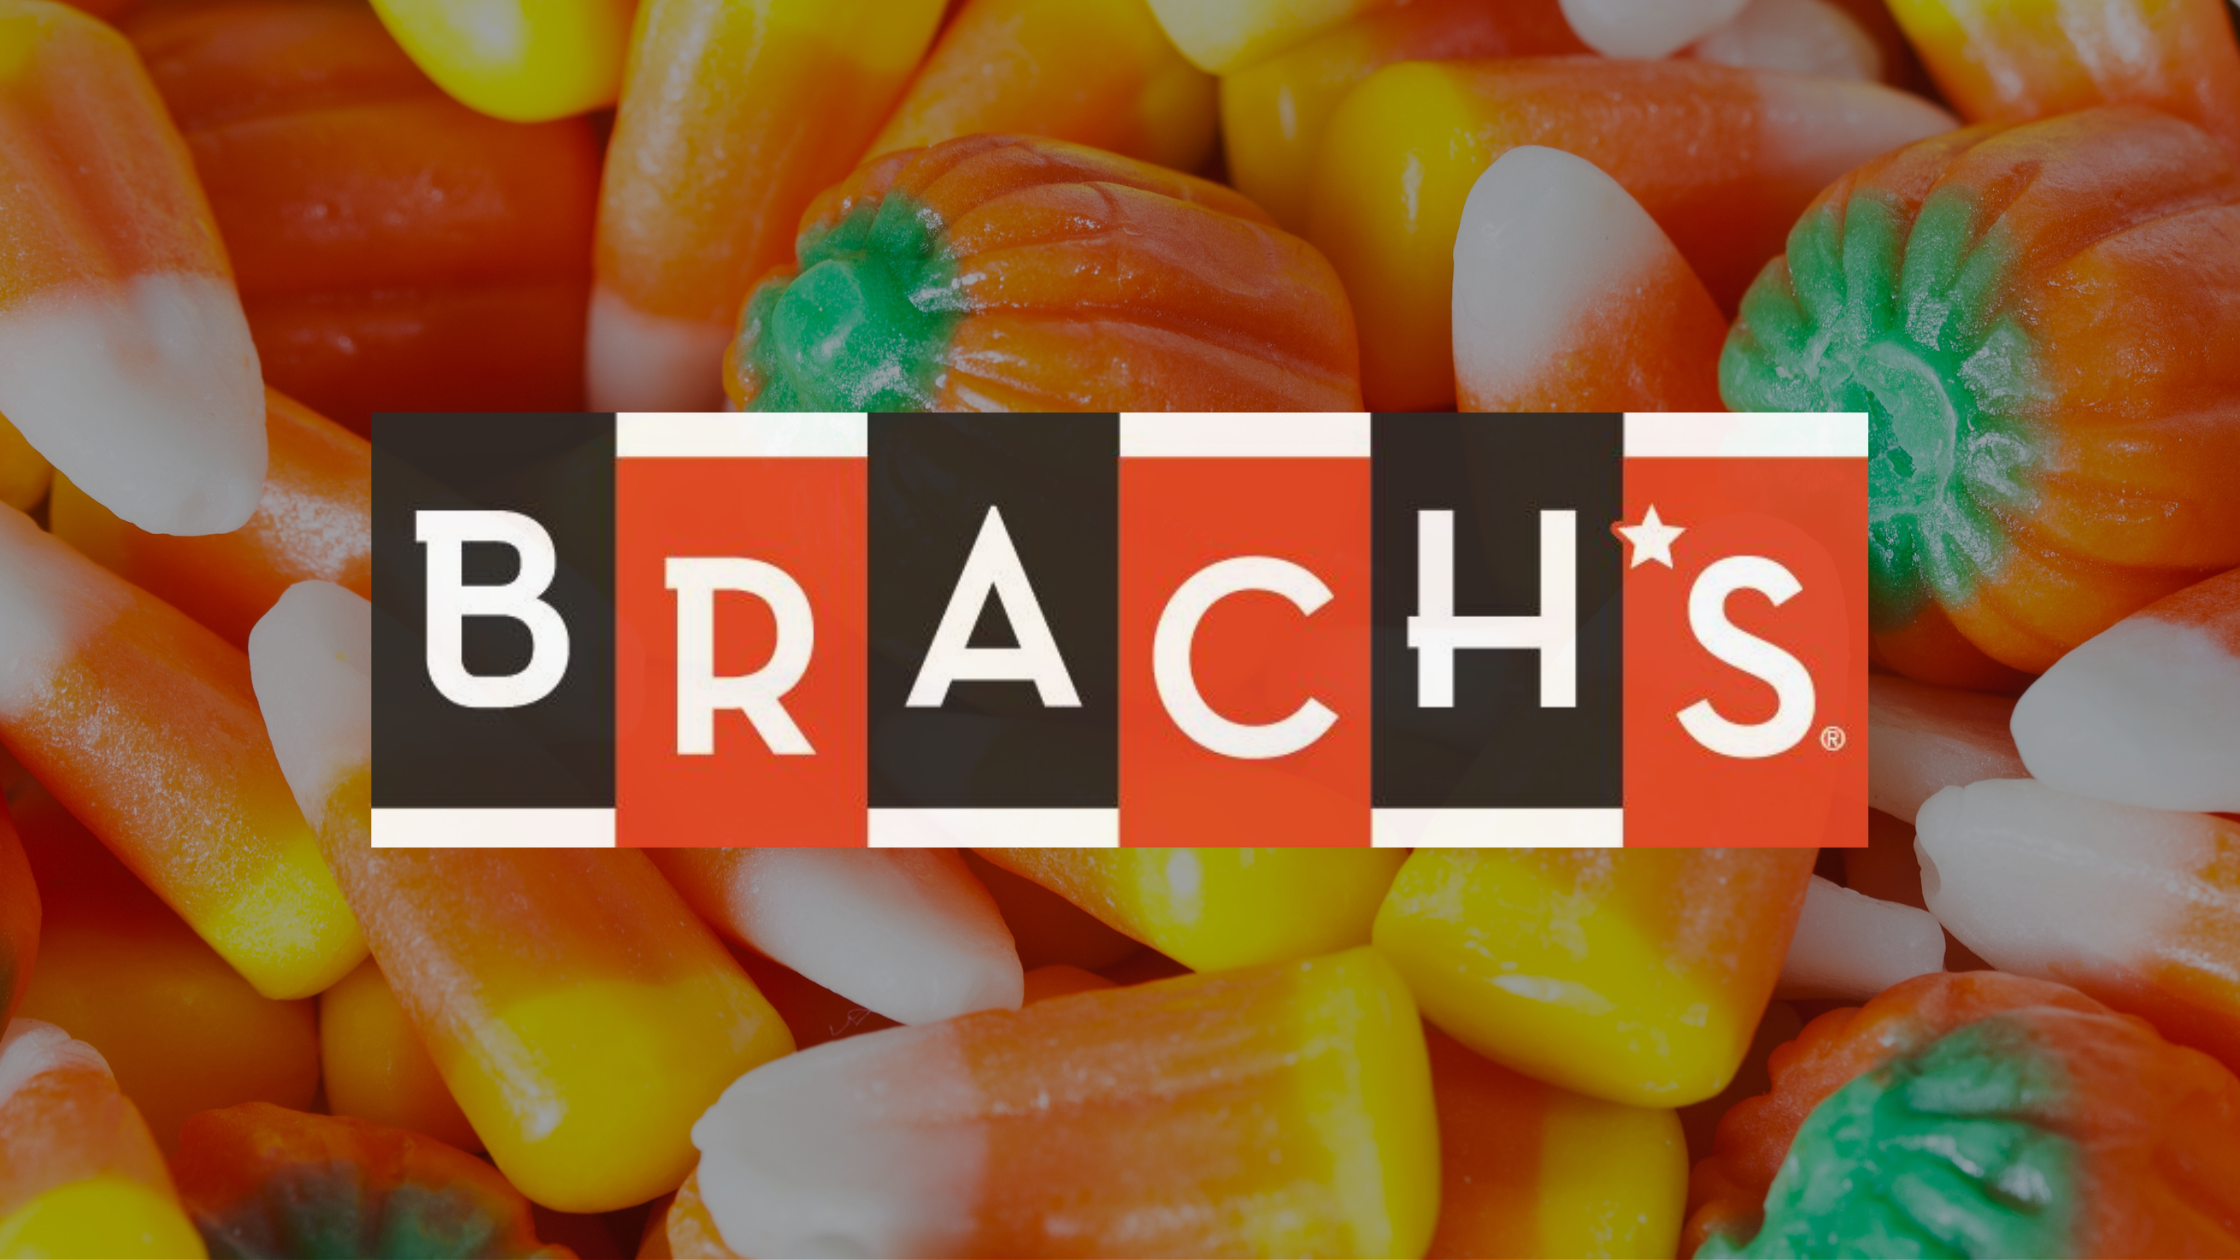 5,000 Win Free Brach's Candy Corn (+ Enter to Win More Prizes